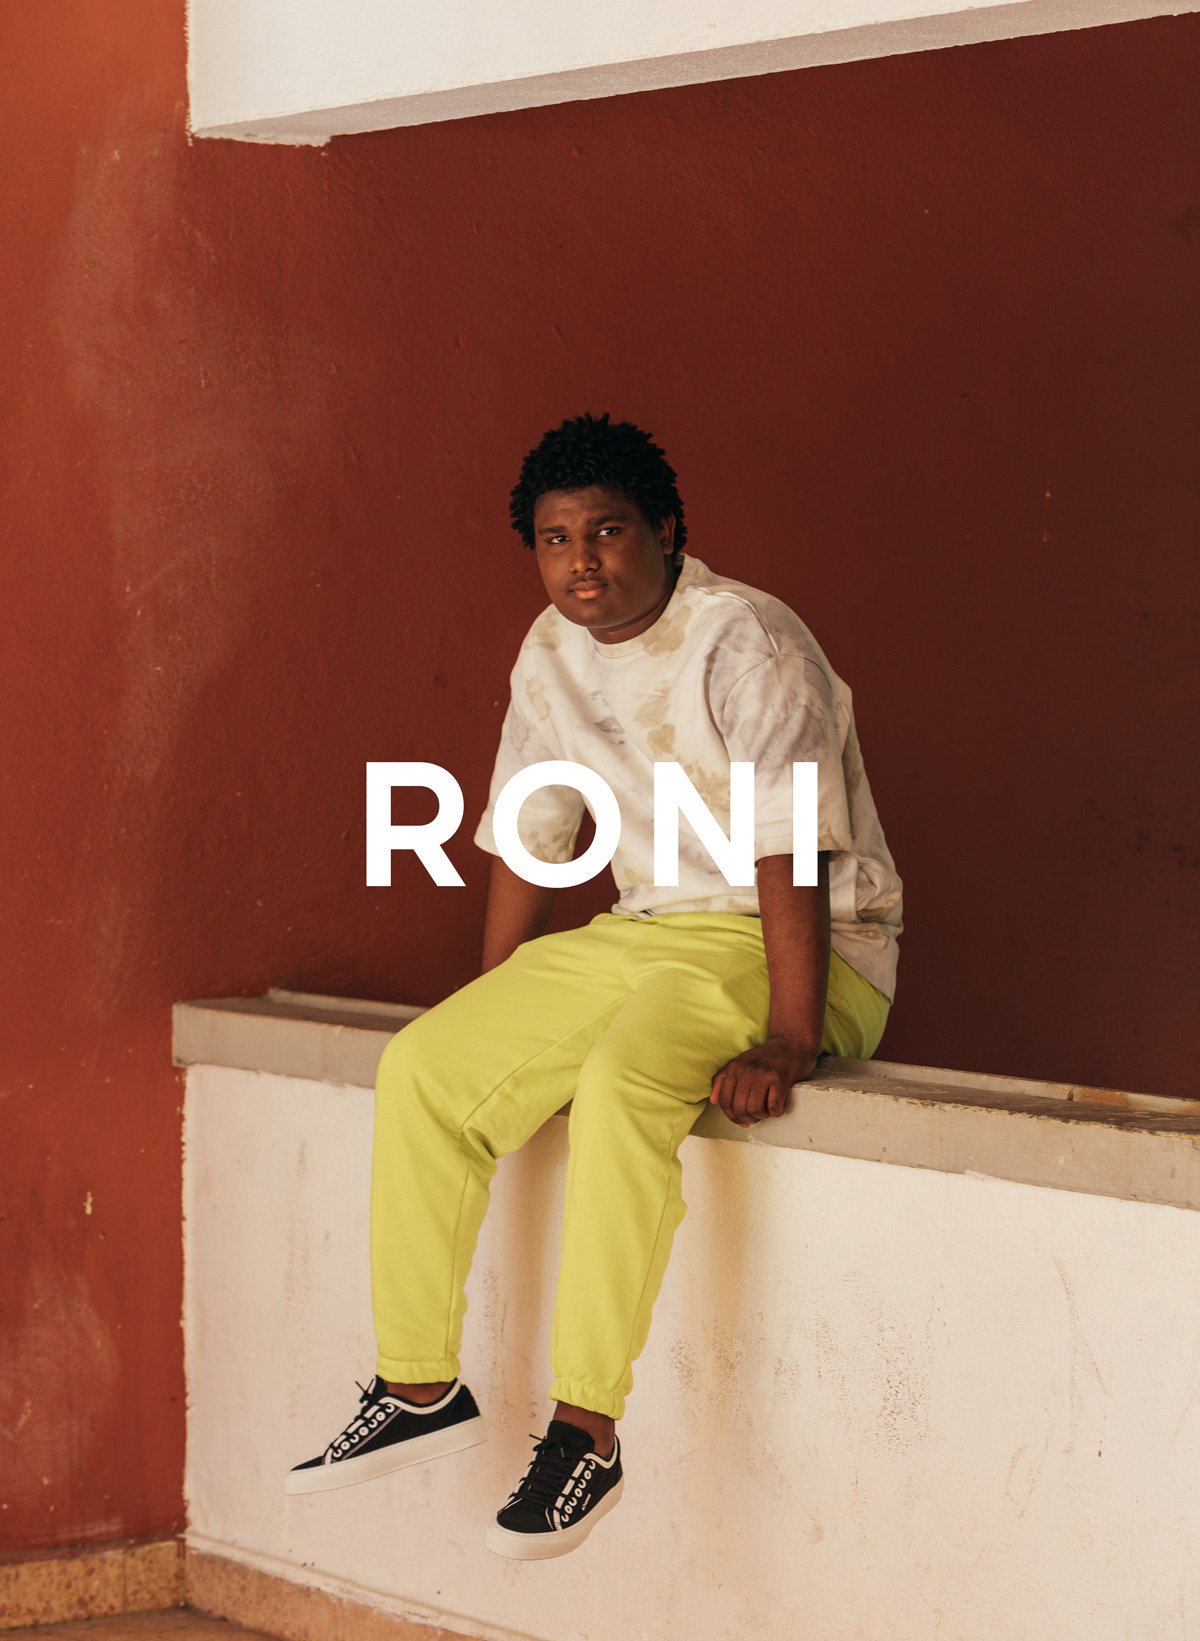 A man sitting on a ledge with custom shoes named Roni, showcasing Diverge sneakers and promote social impact throught the imagine project.